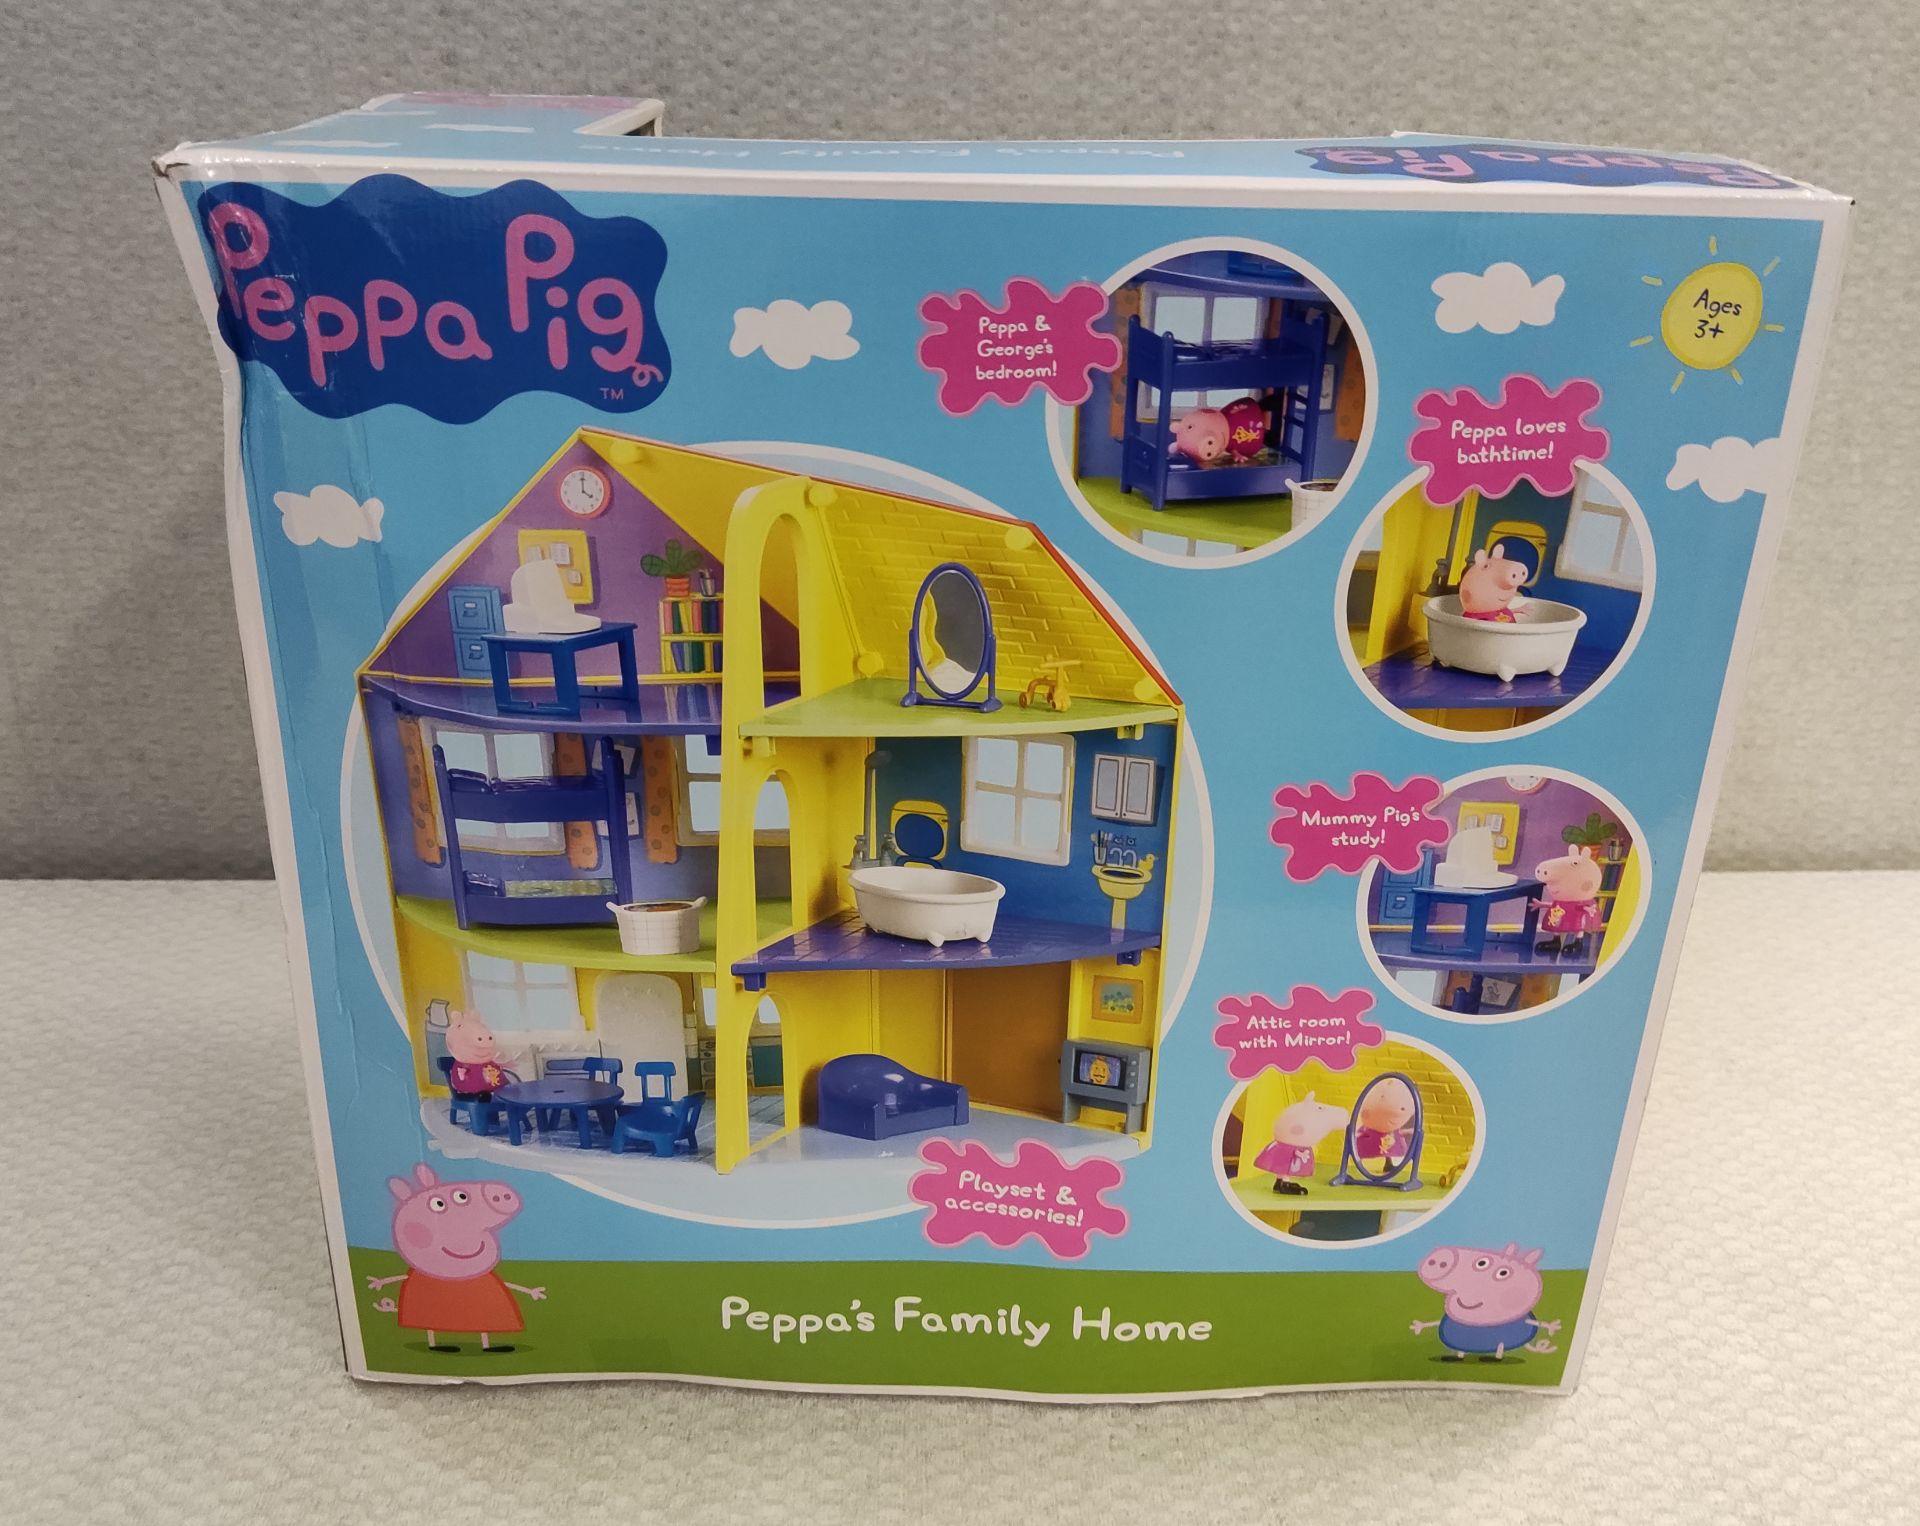 1 x Peppa Pig Peppa's Family Home Play Set - New/Boxed - Image 3 of 6